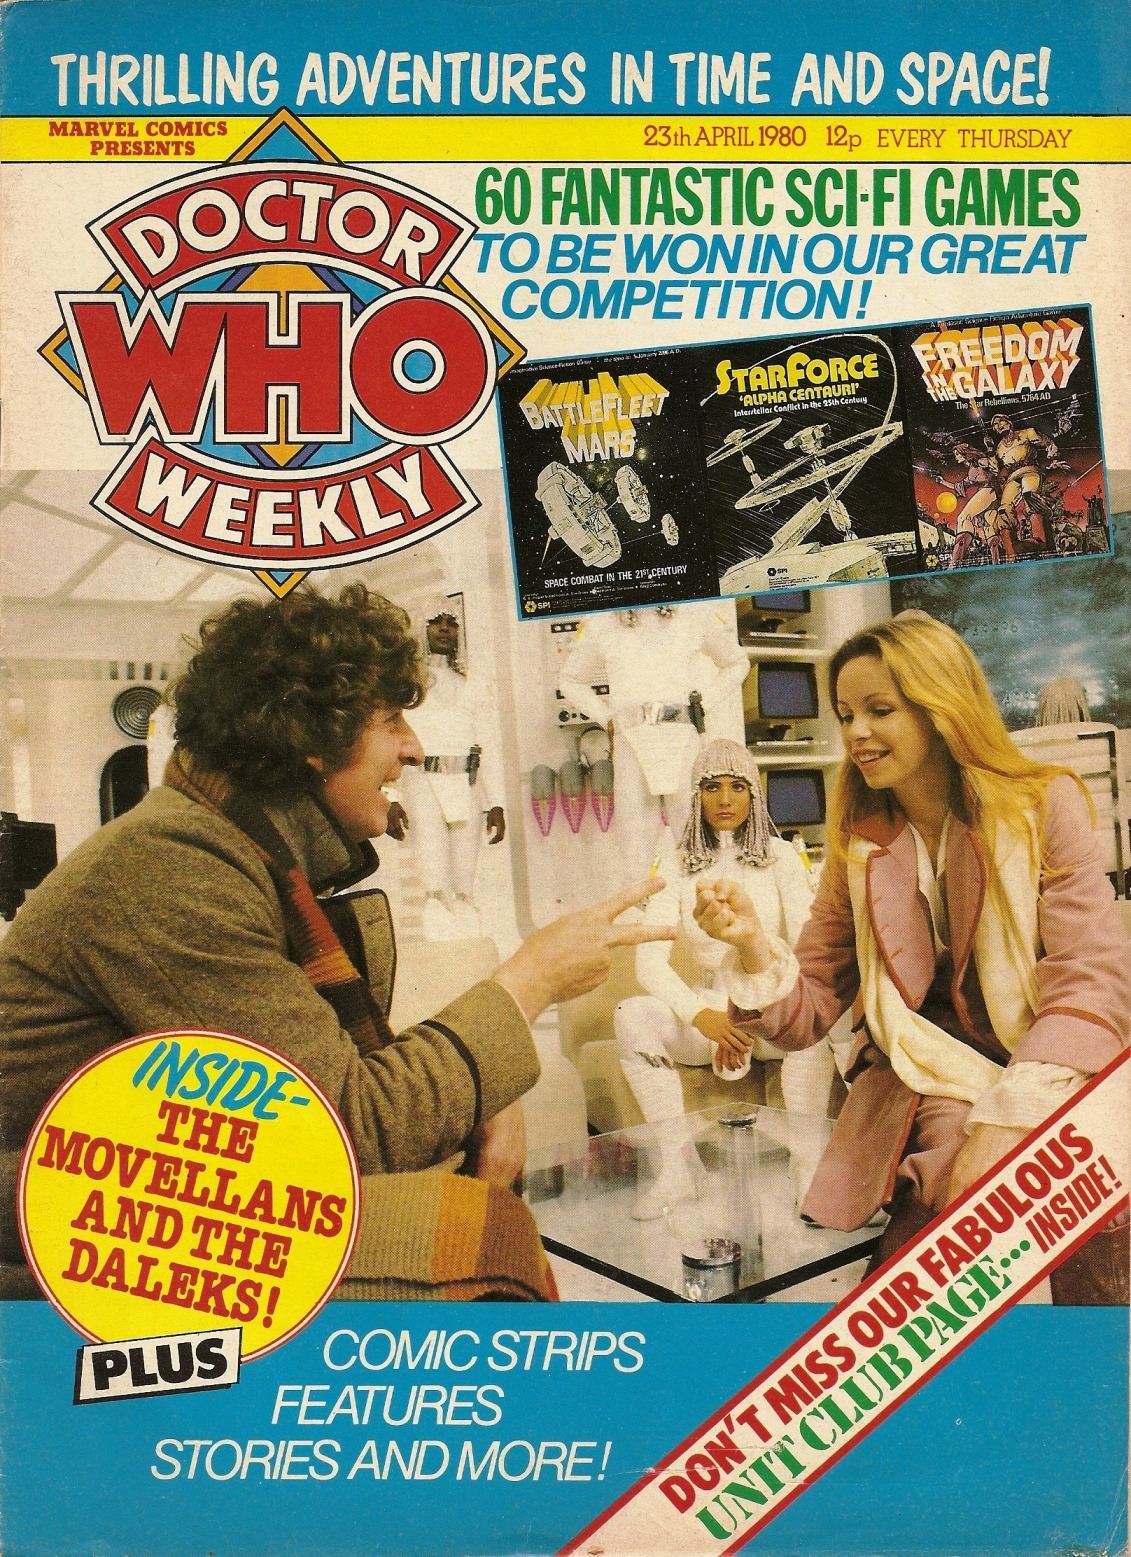 Doctor Who Weekly - Issue 28 - 23rd April 1980